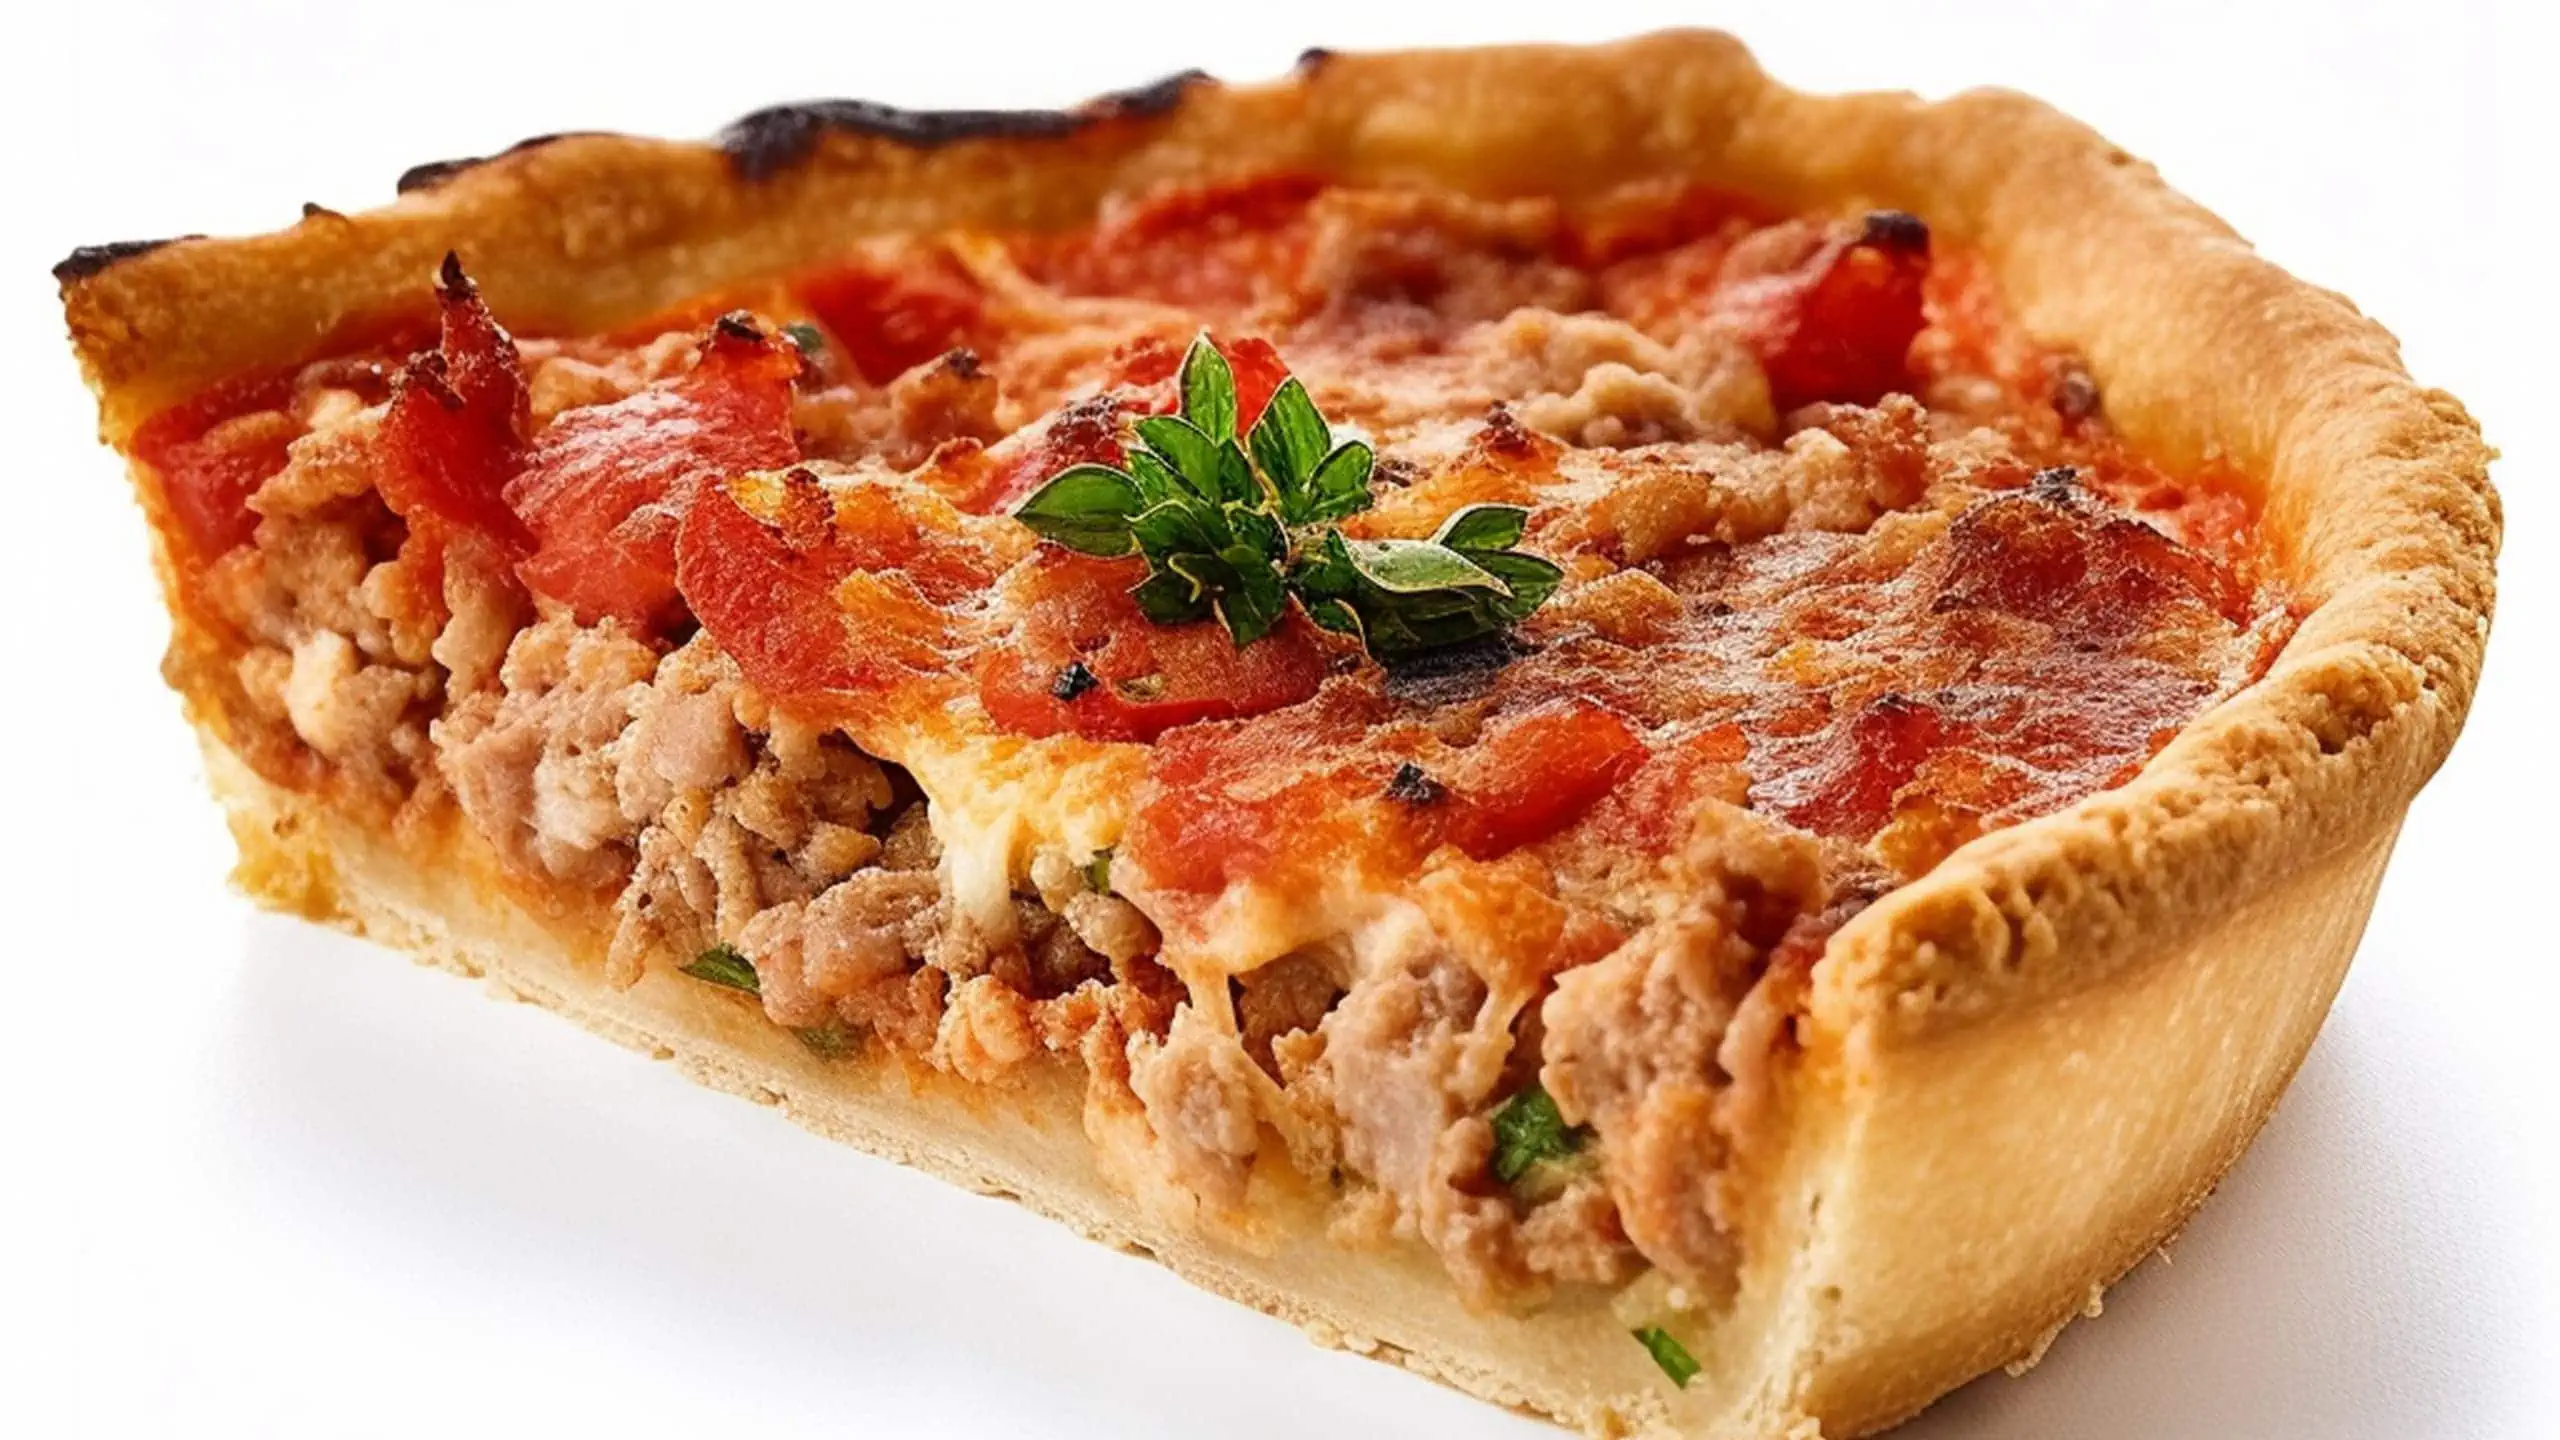 Our version of pizza burger pie recipe